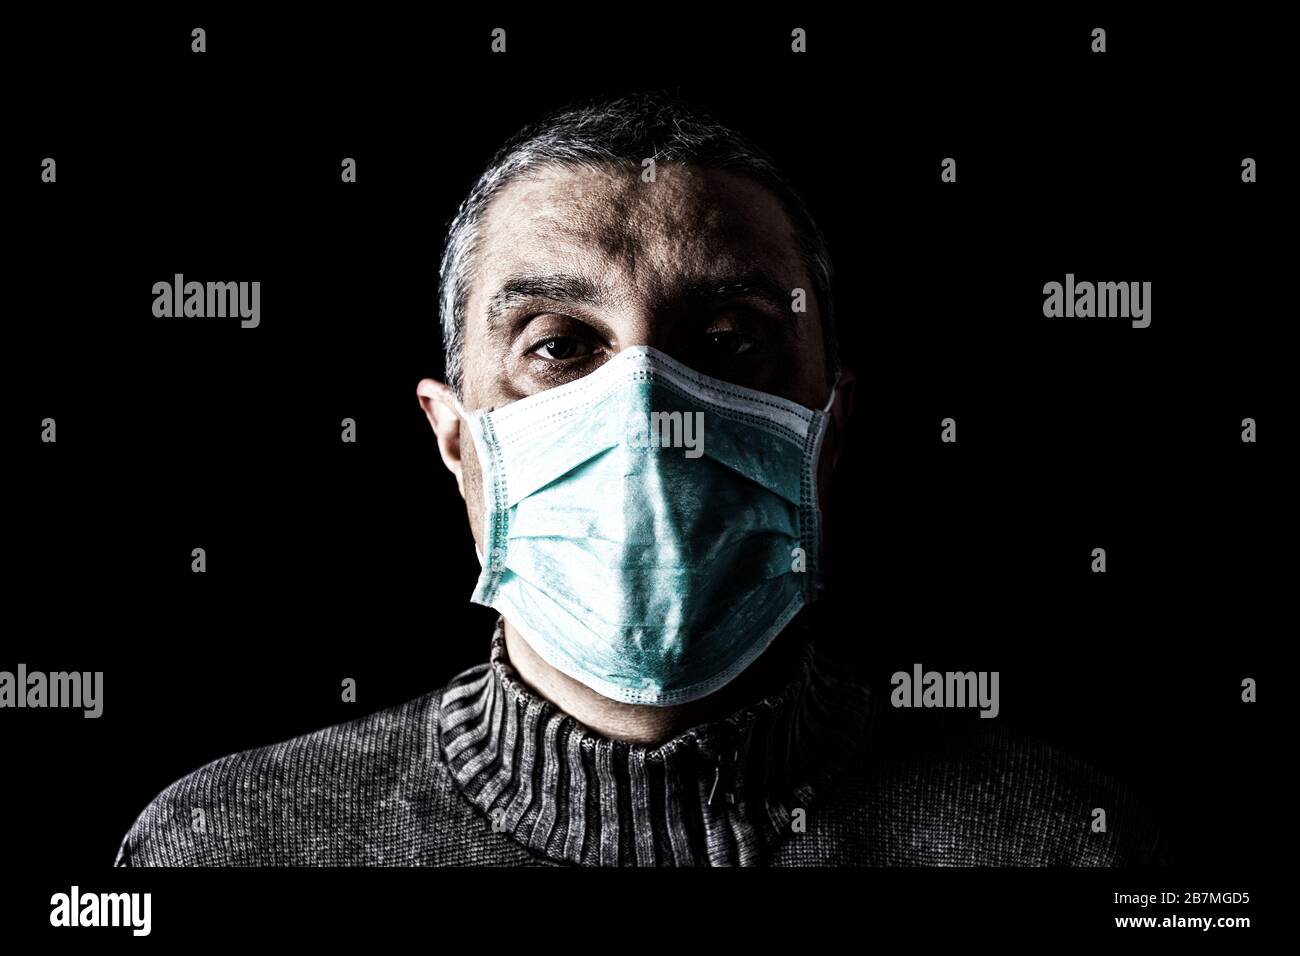 Man with surgical mask. Pandemic or epidemic and scary, fear or danger concept. Protection for biohazard like COVID-19 aka Coronavirus. Black Backgrou Stock Photo